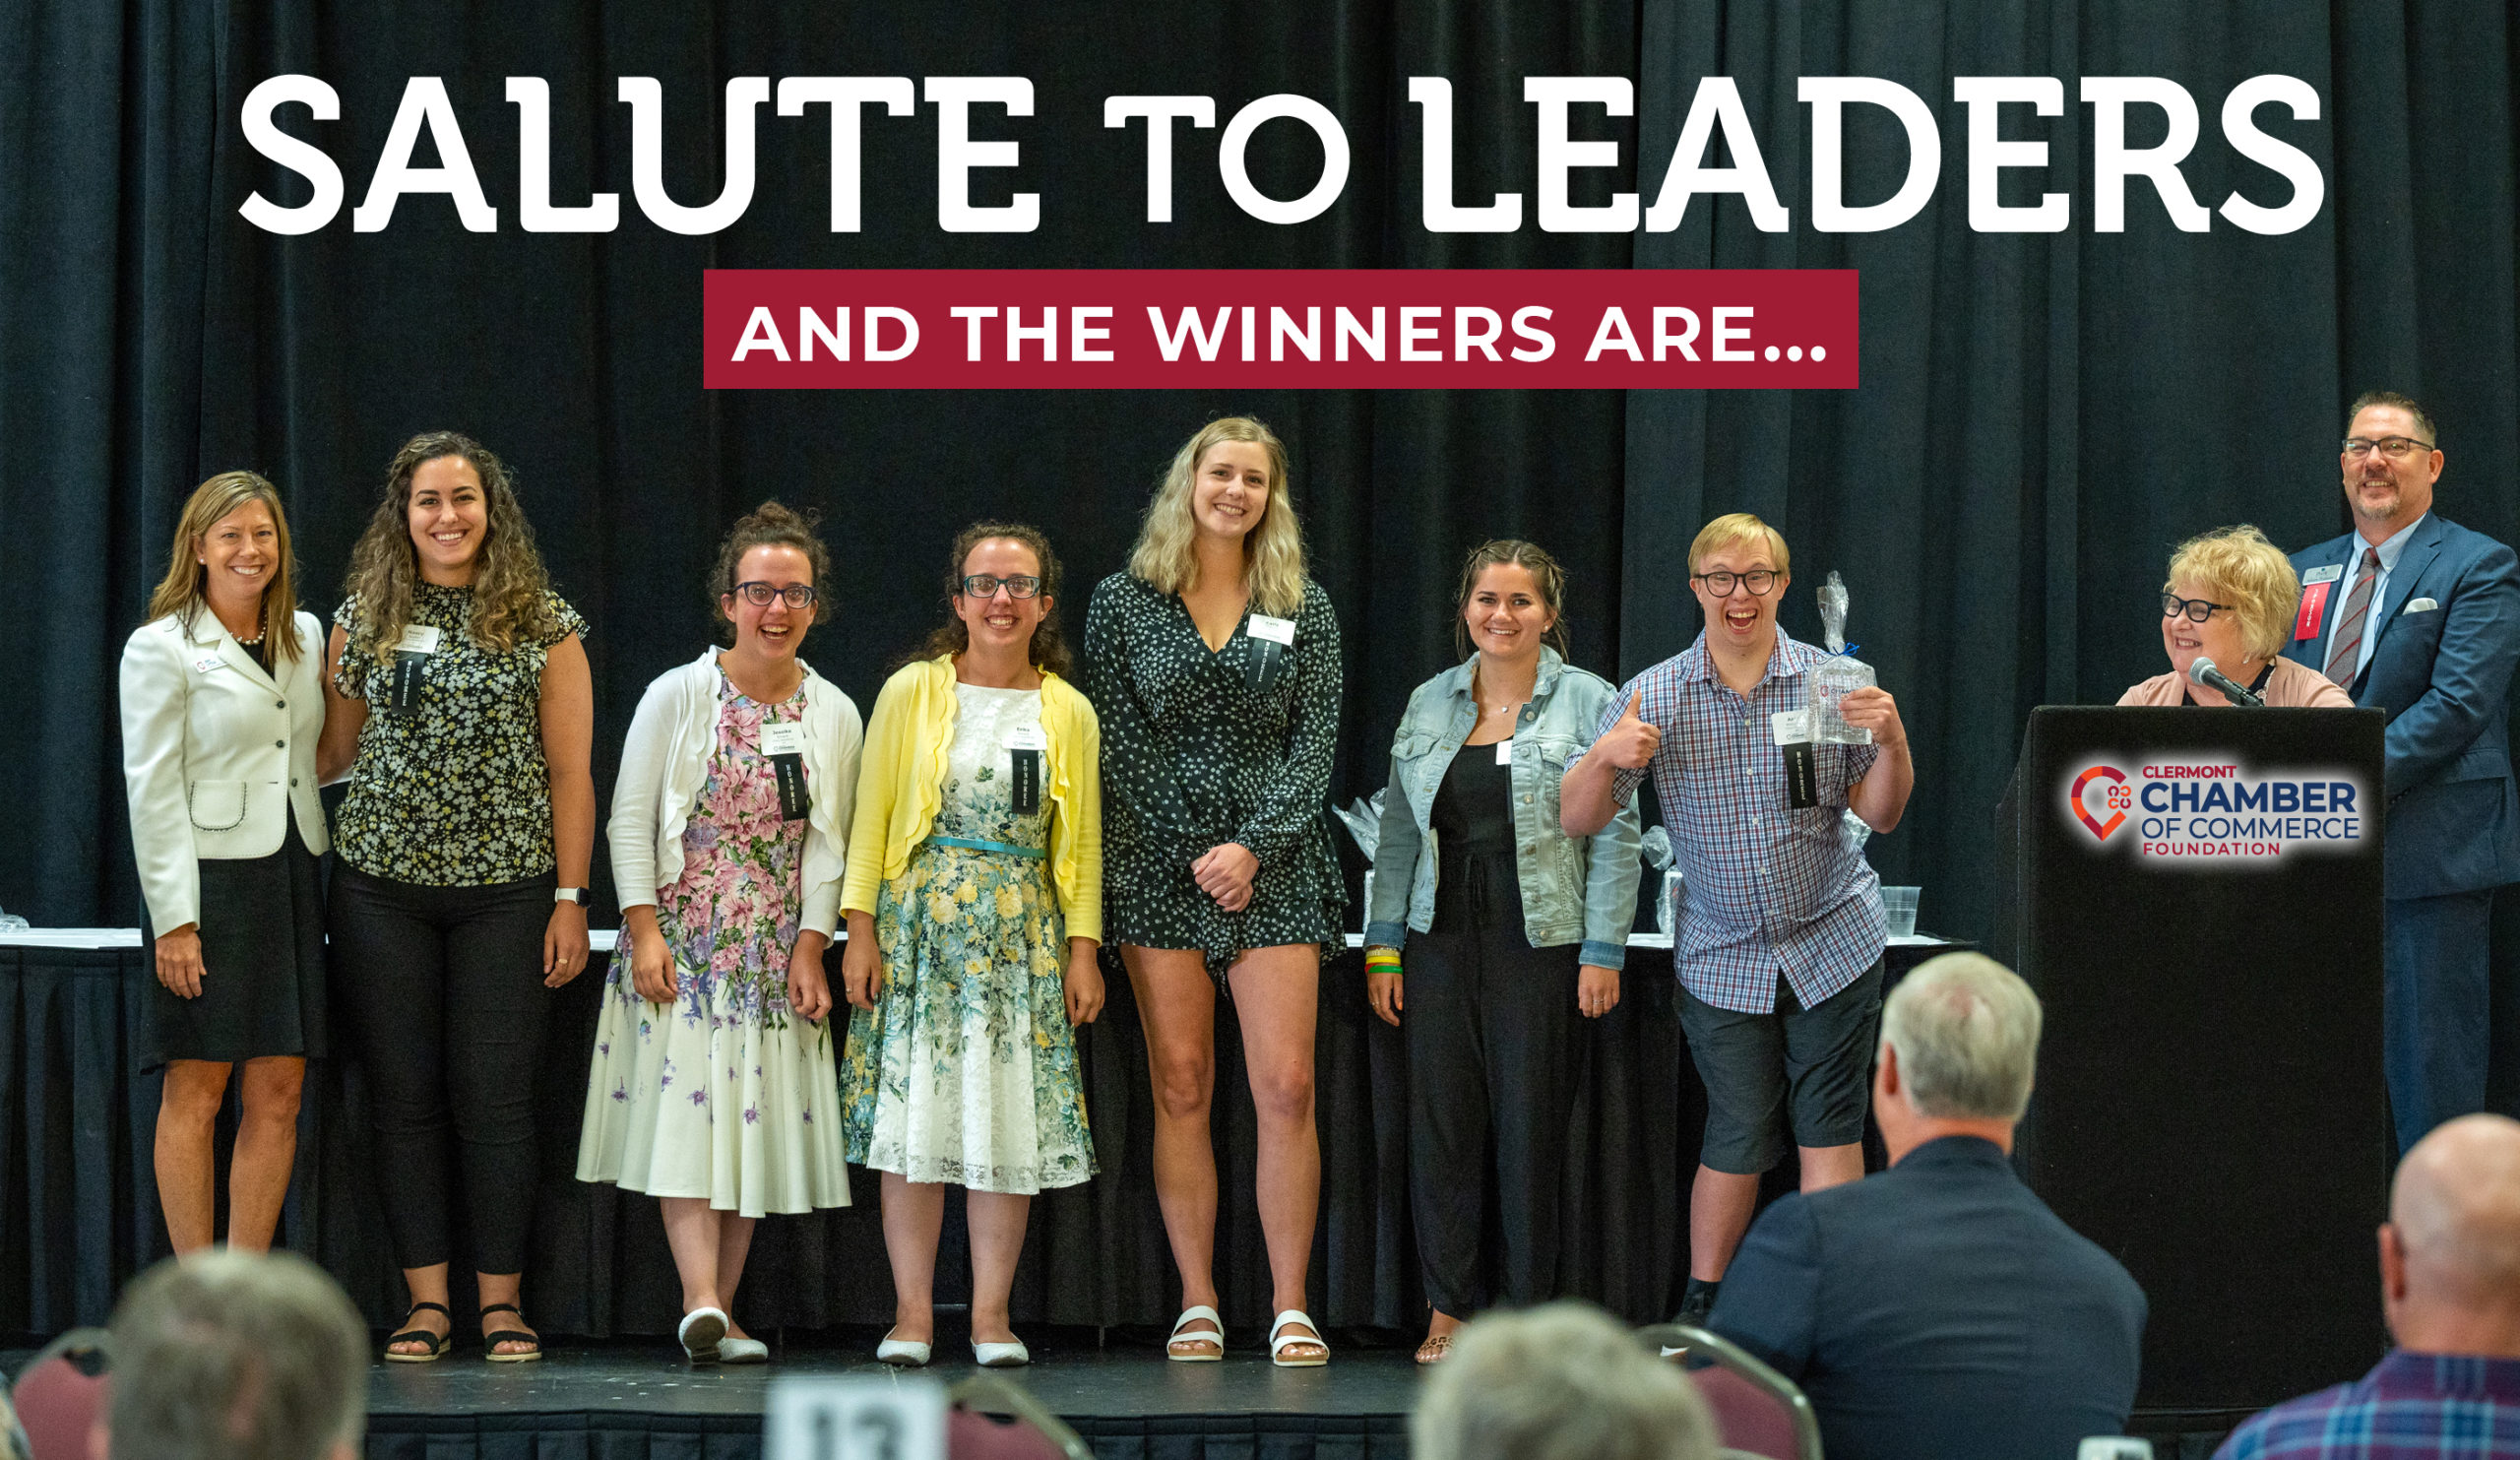 Clermont Chamber of Commerce Foundation announces 2022 Salute to Leaders Award winners